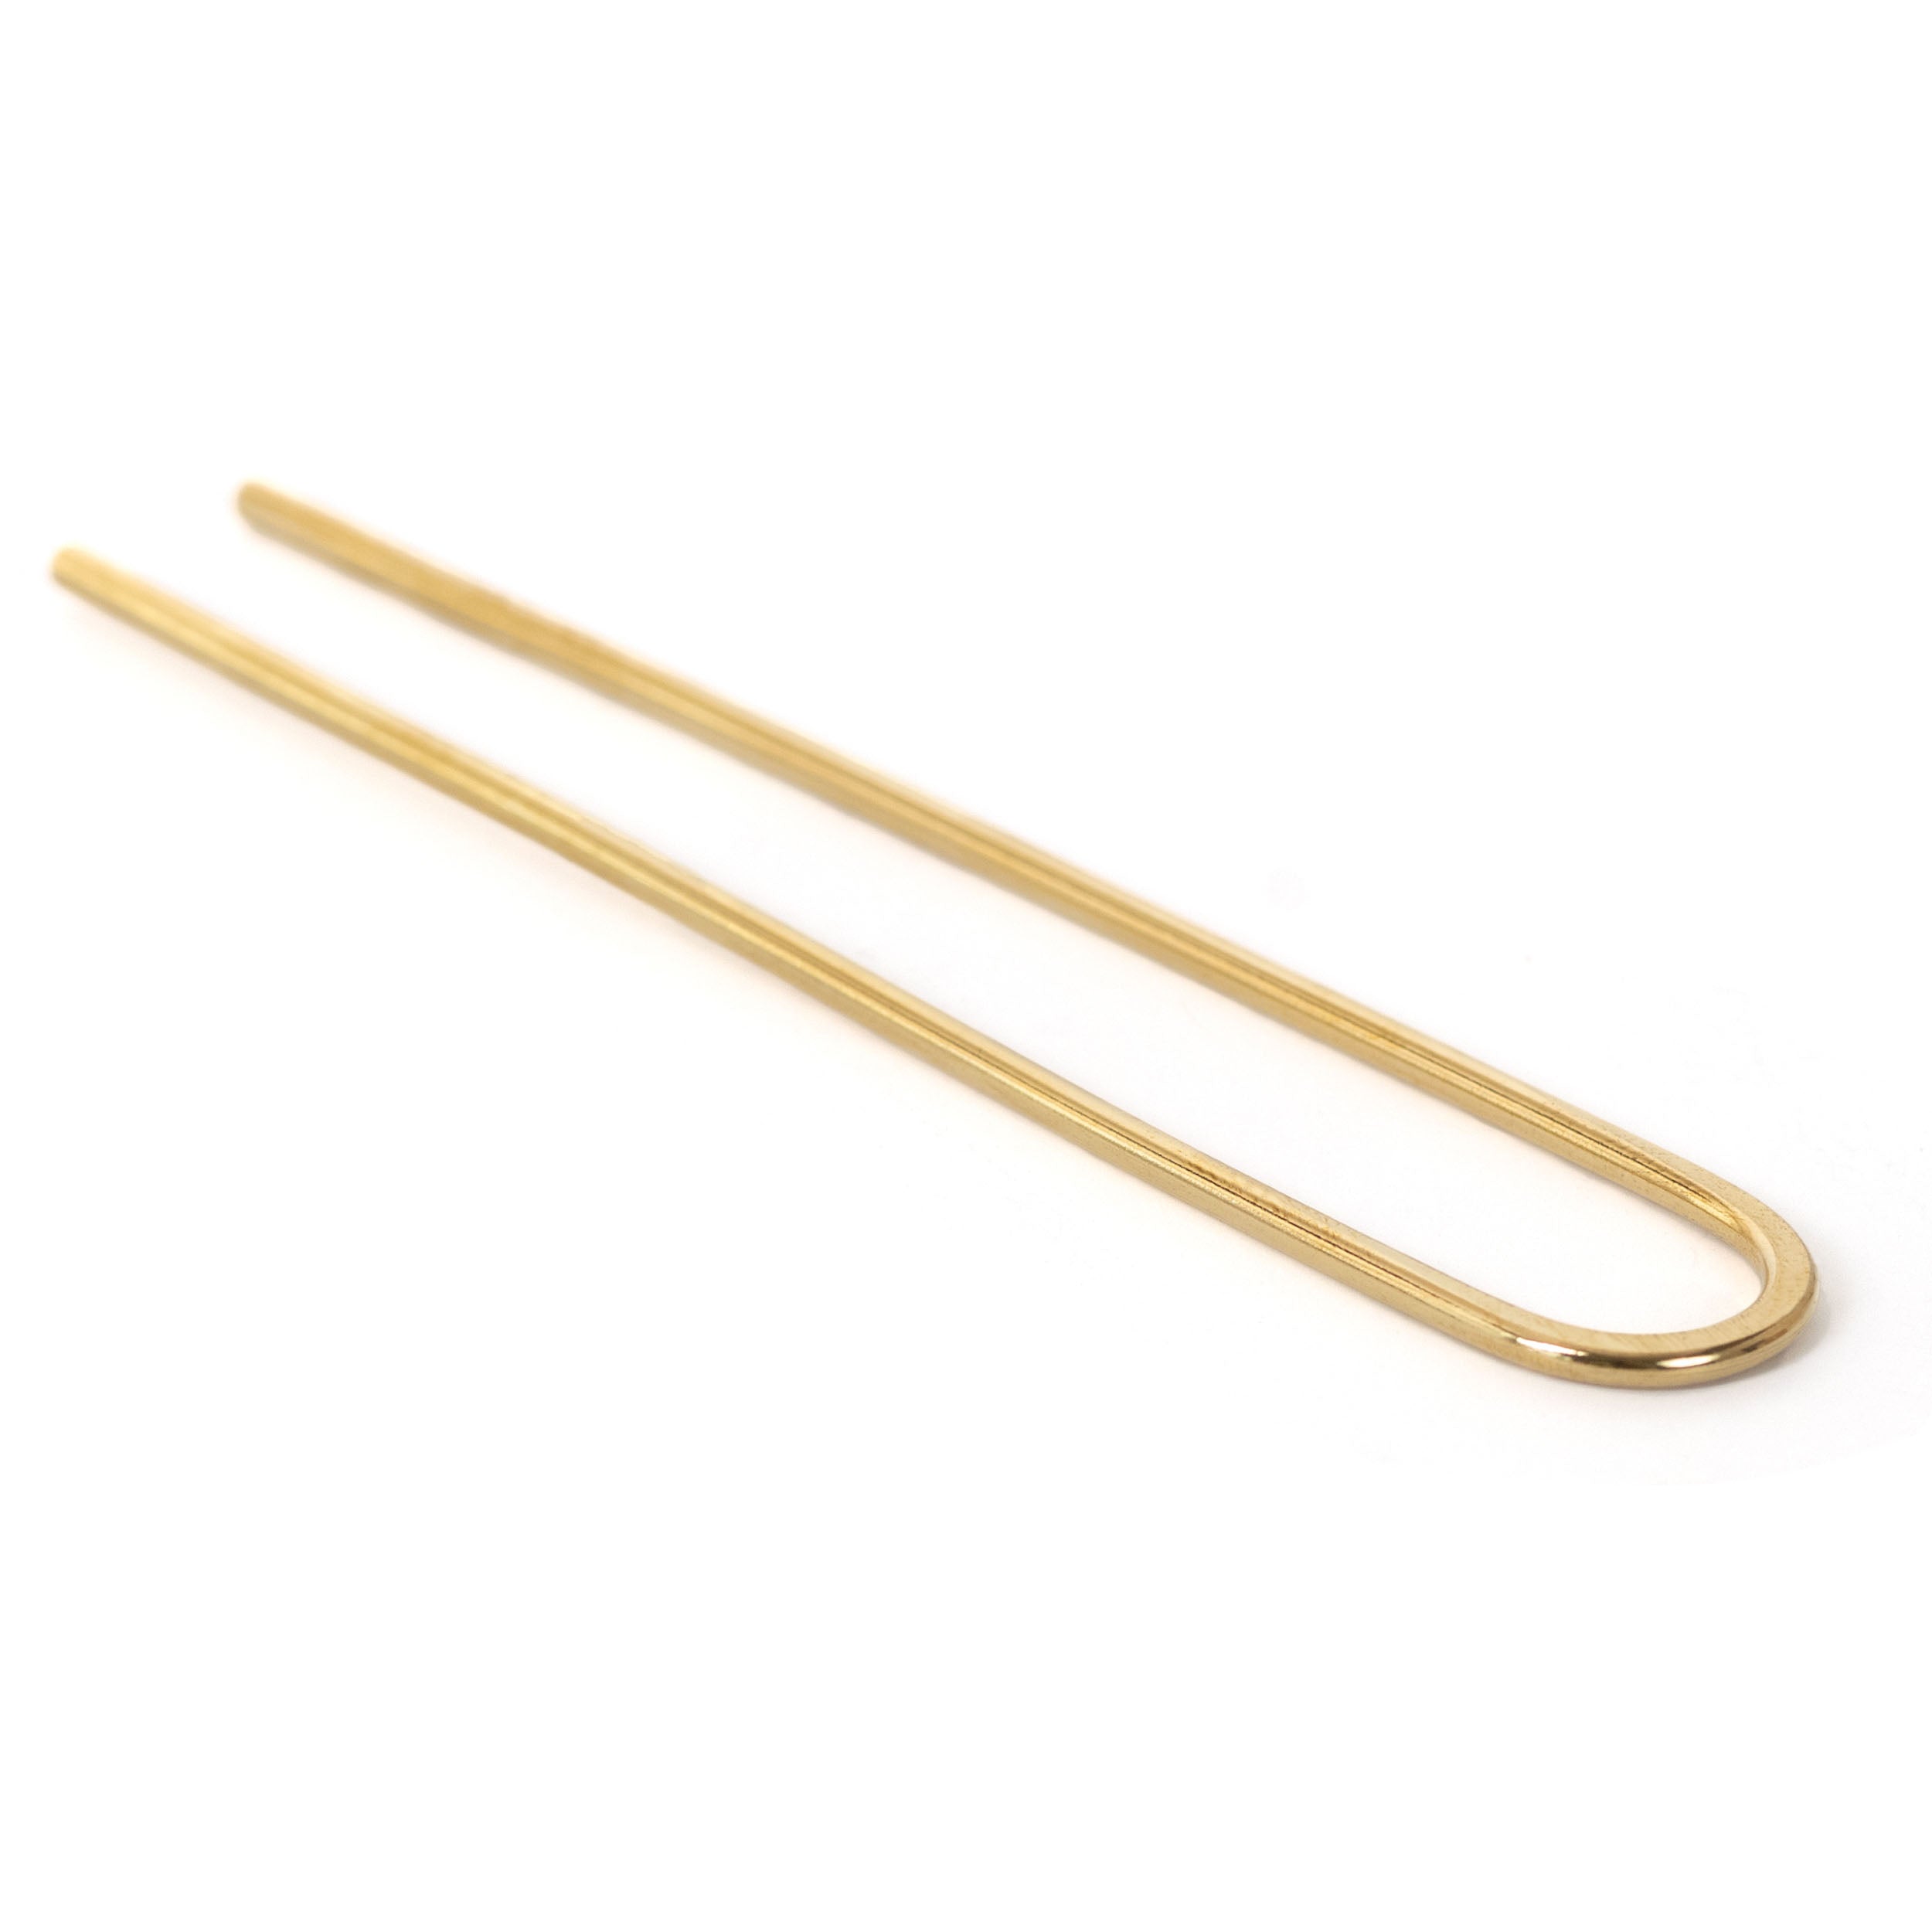 Minimal Arch Hair Pin - Favor Jewelry